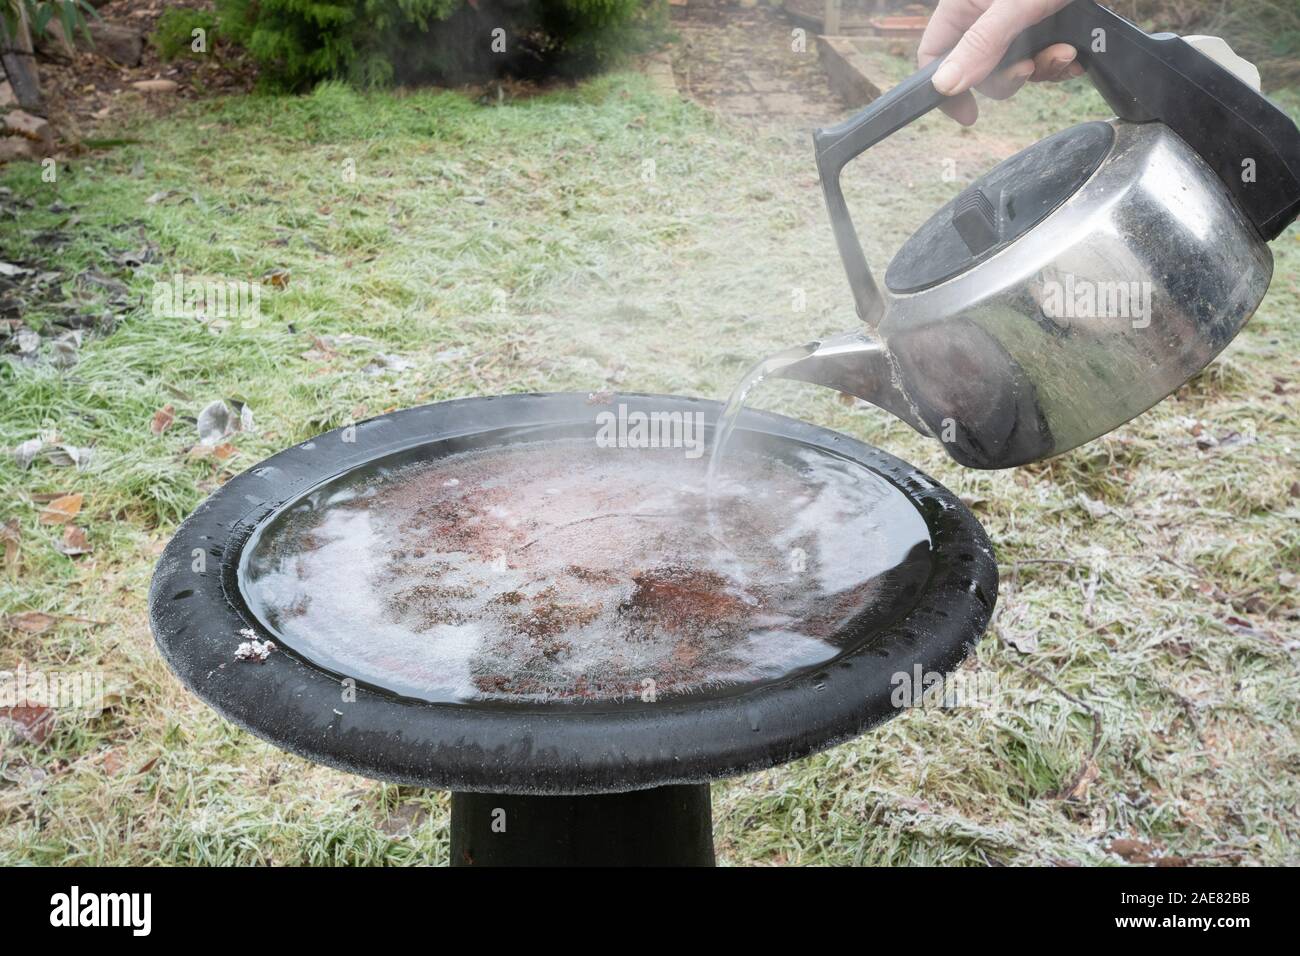 Boiling ice in a kettle 